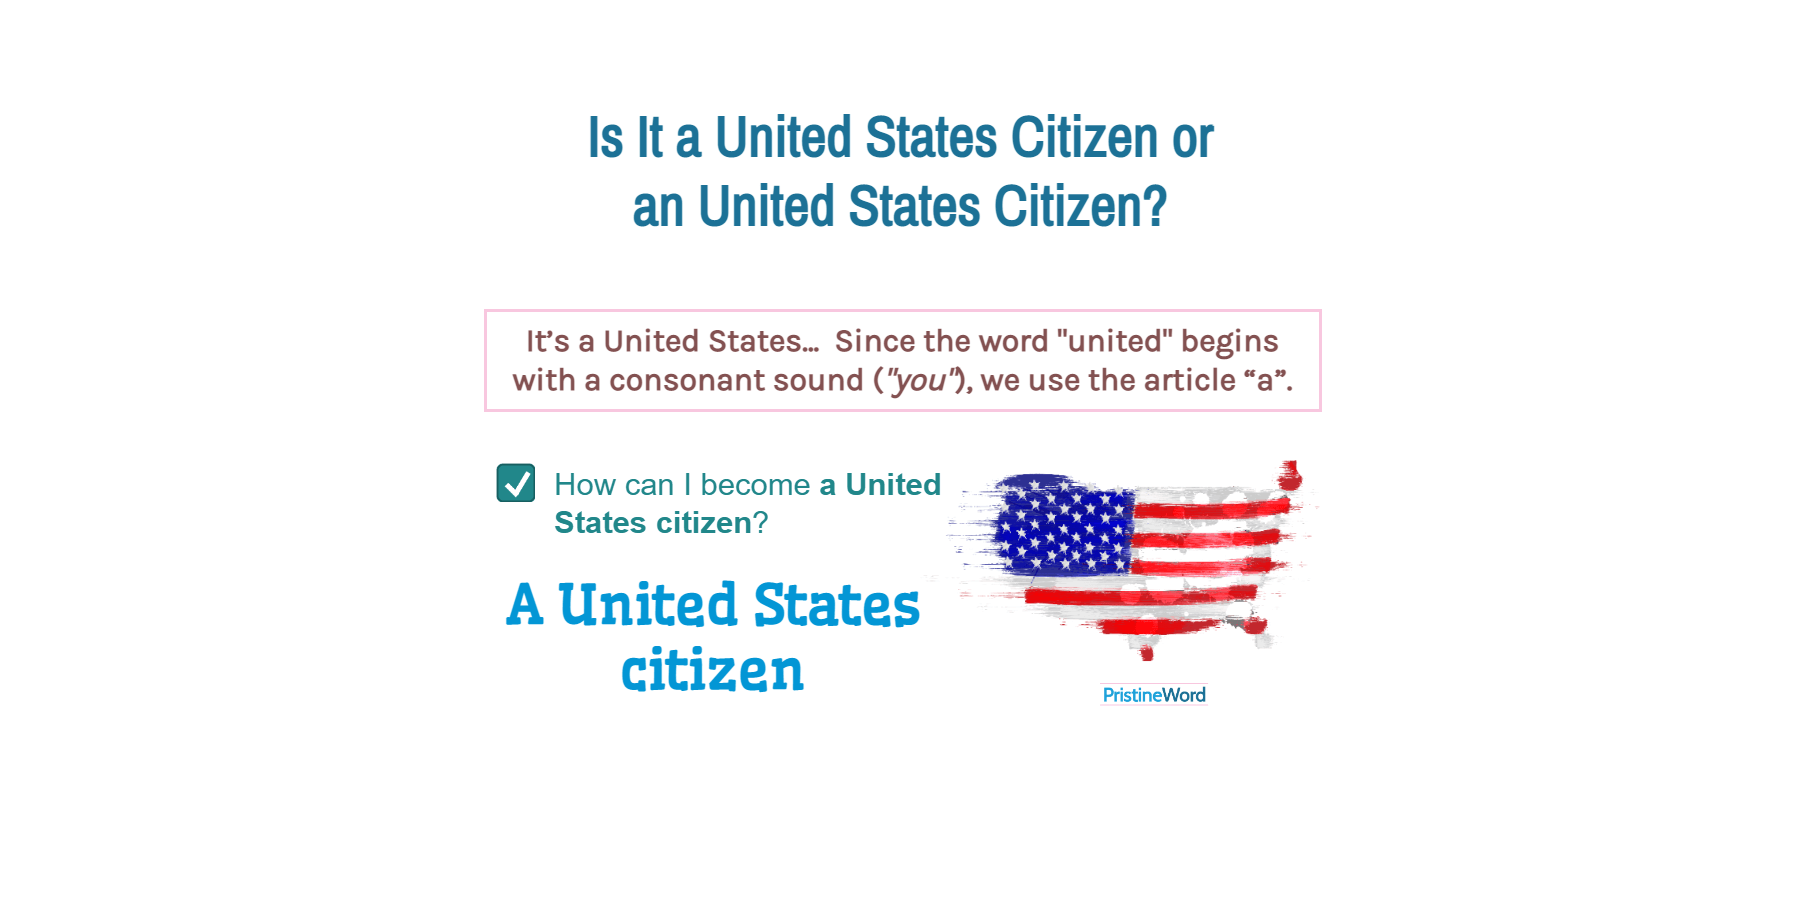 Is It a United States or an United States?